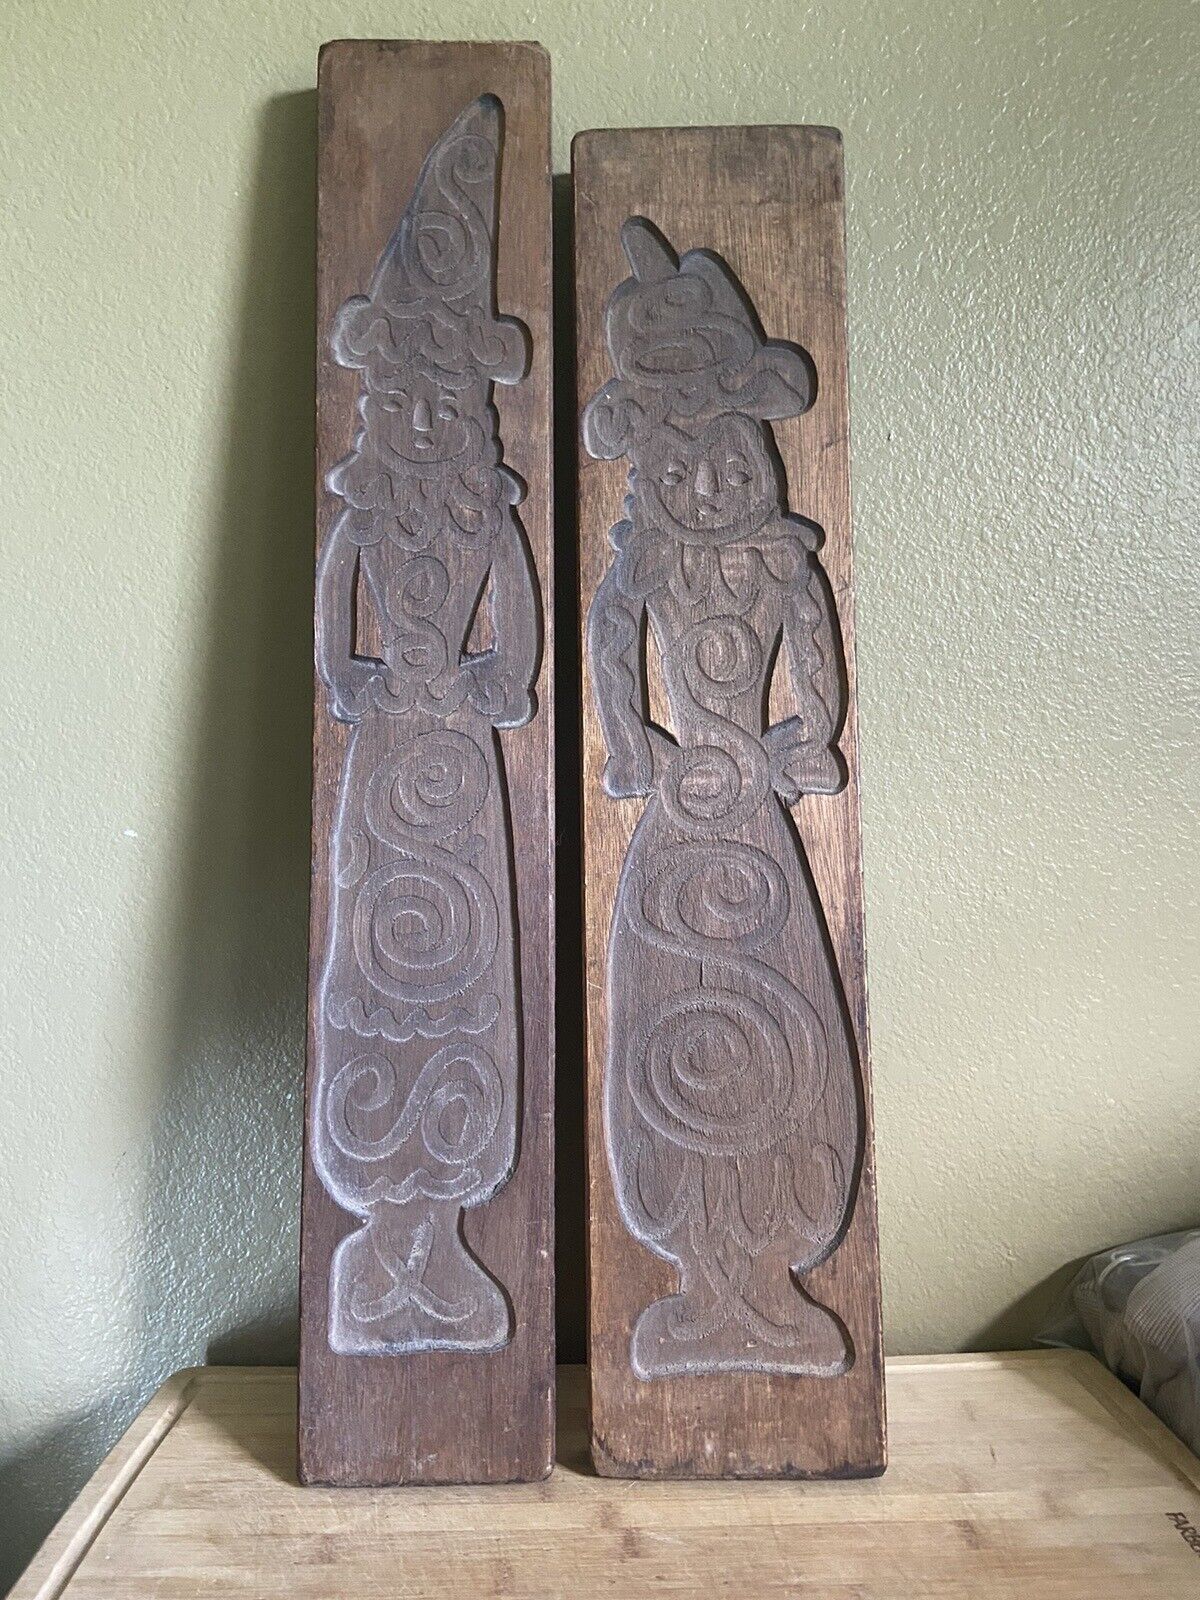 2 Antique 26” And 27” Dutch Gingerbread Springerle Speculaas Wood Cookie Molds